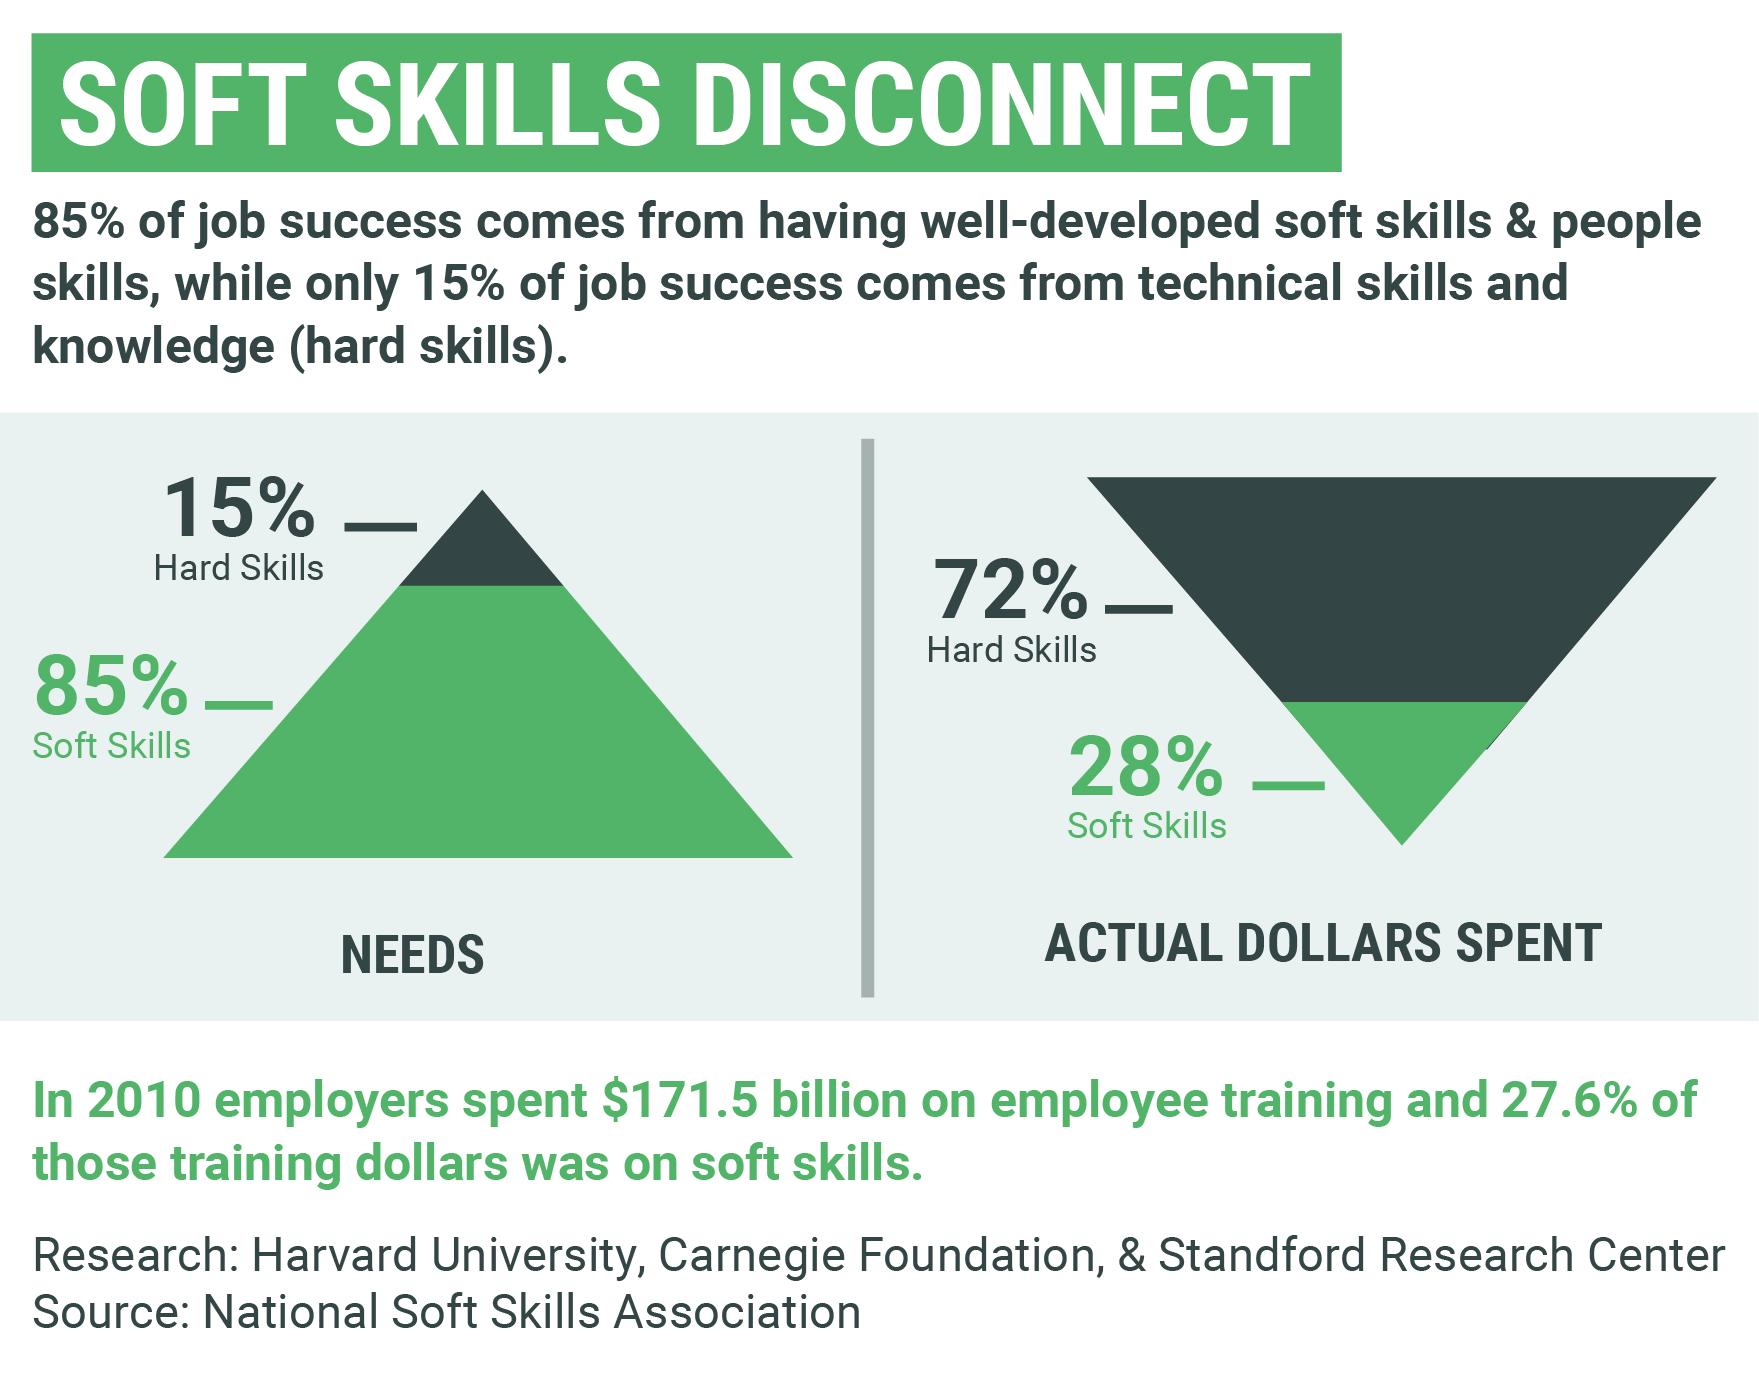 The Soft Skills Disconnect